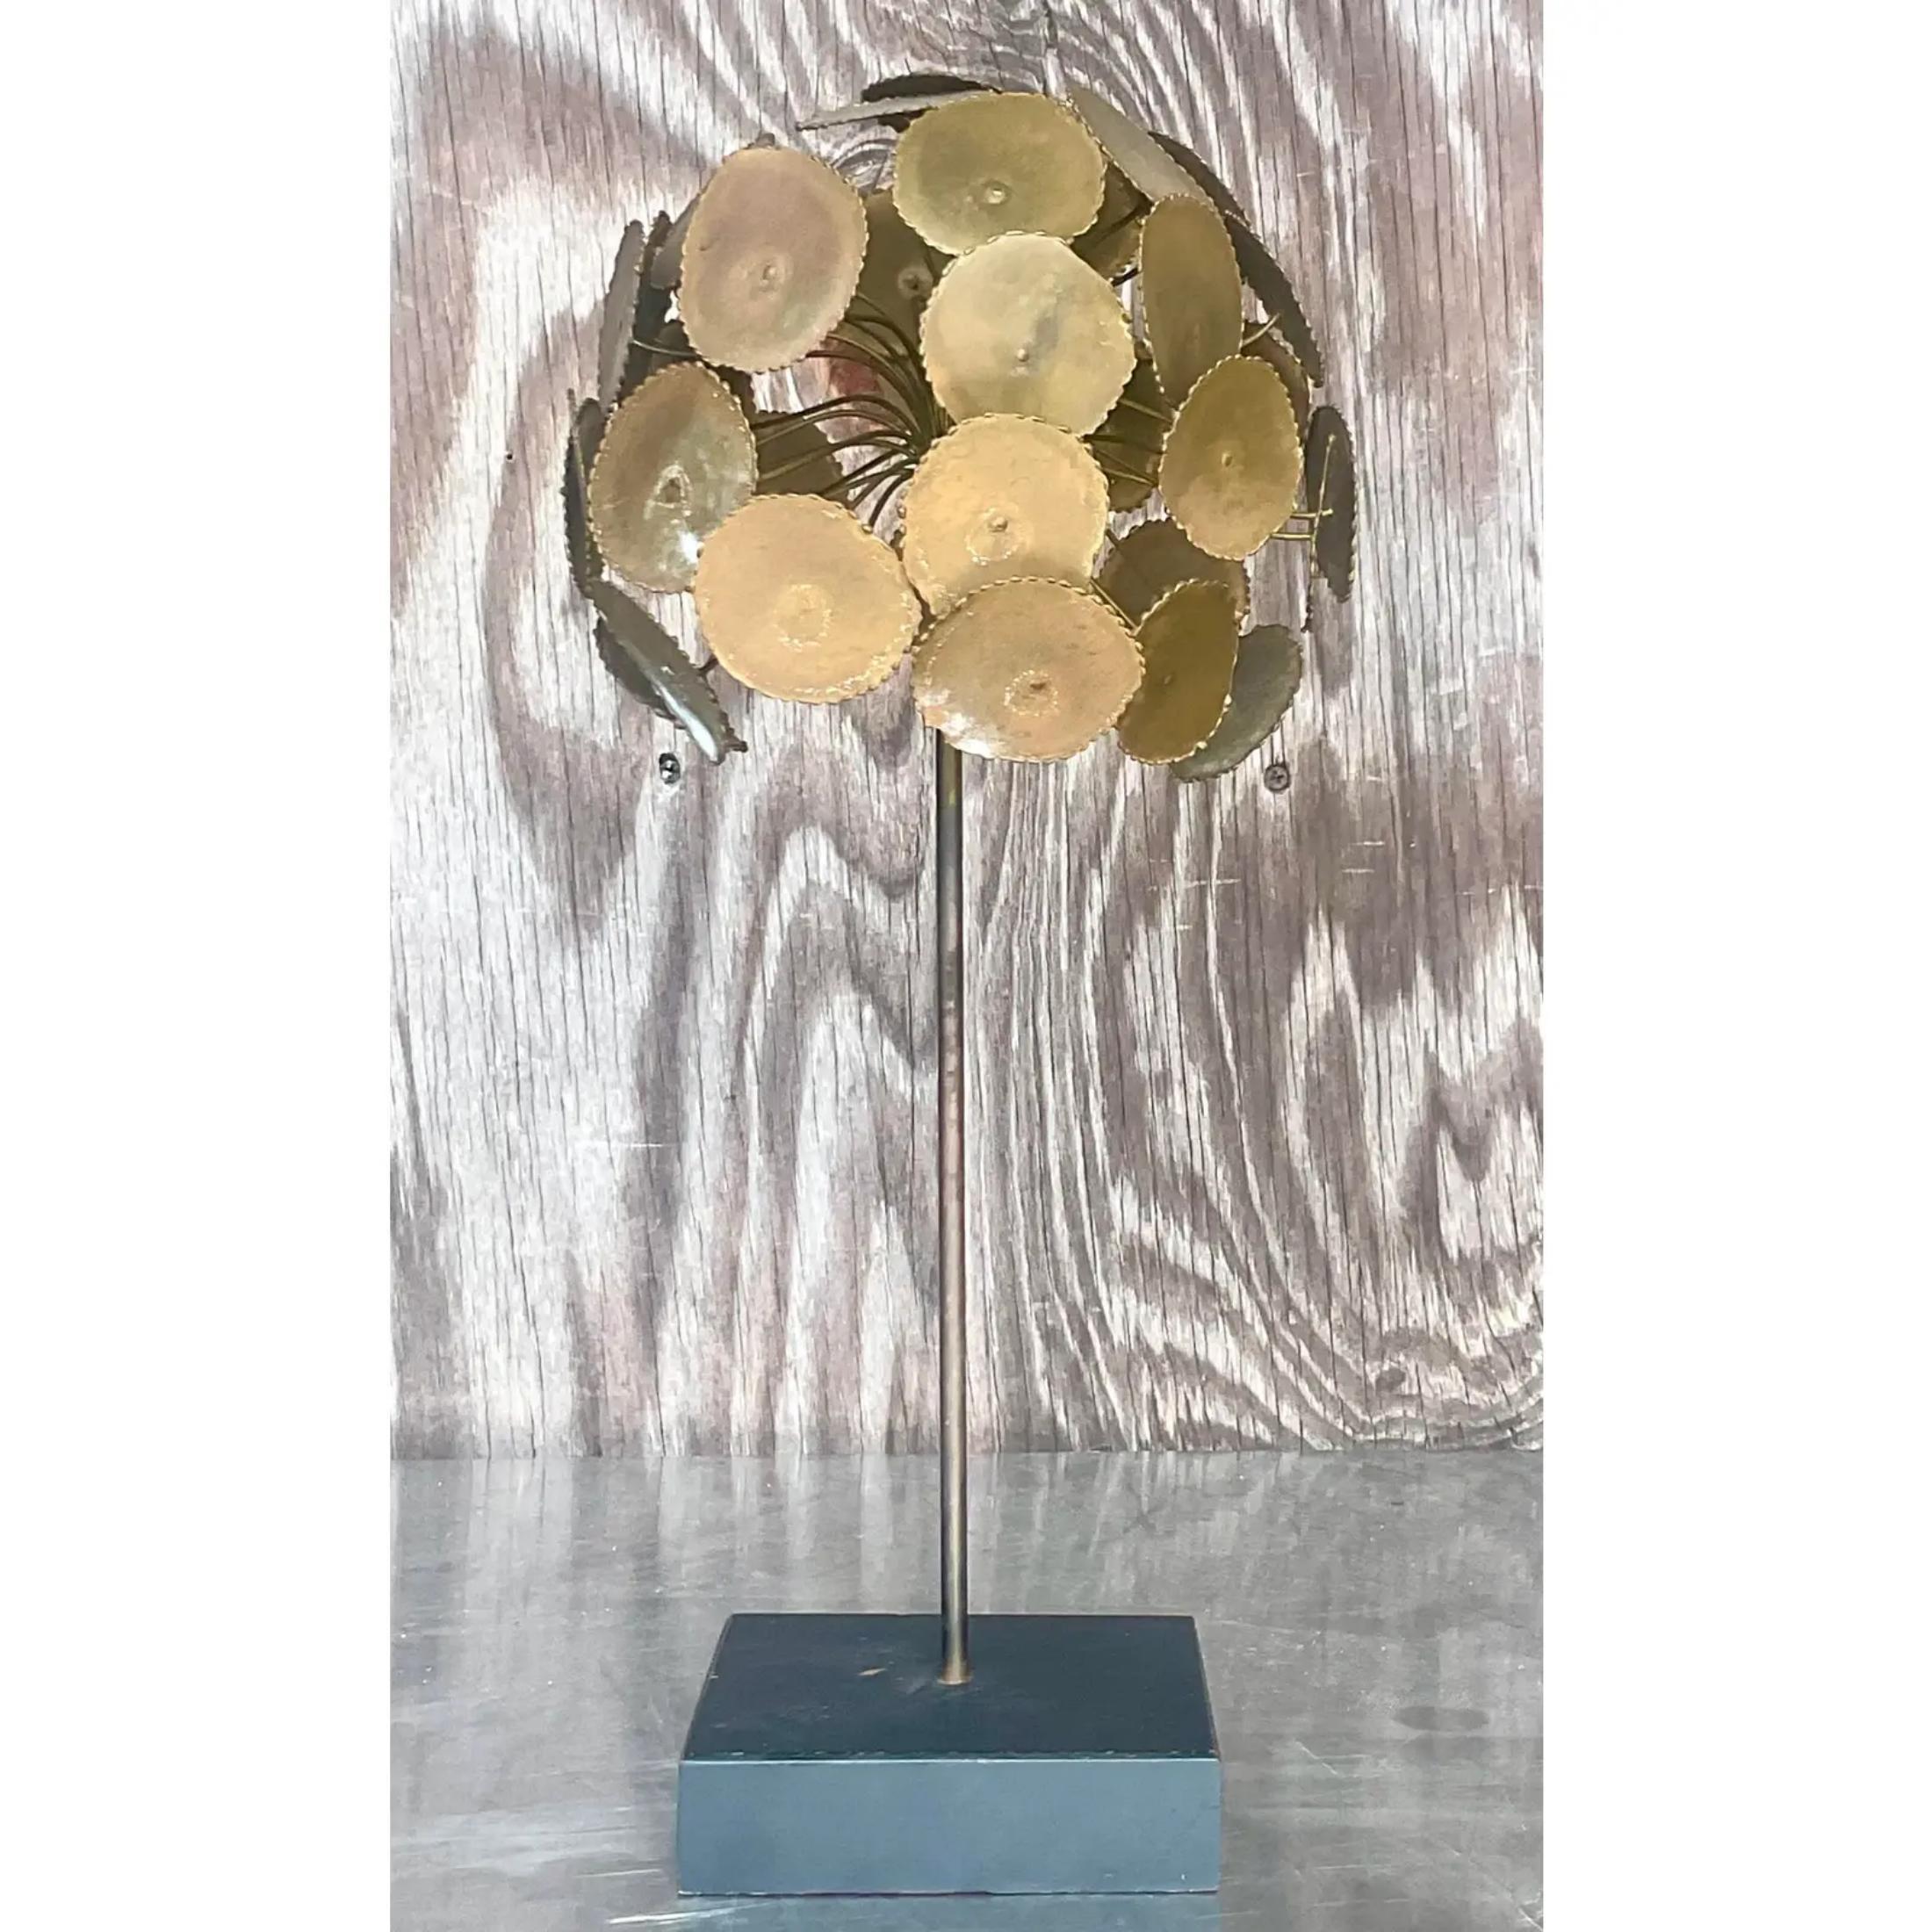 A fabulous vintage MCM sculpture. A chic little torch cut tree with rings of brass. Rests on a wooden block plinth. Acquired from a Palm Beach estate